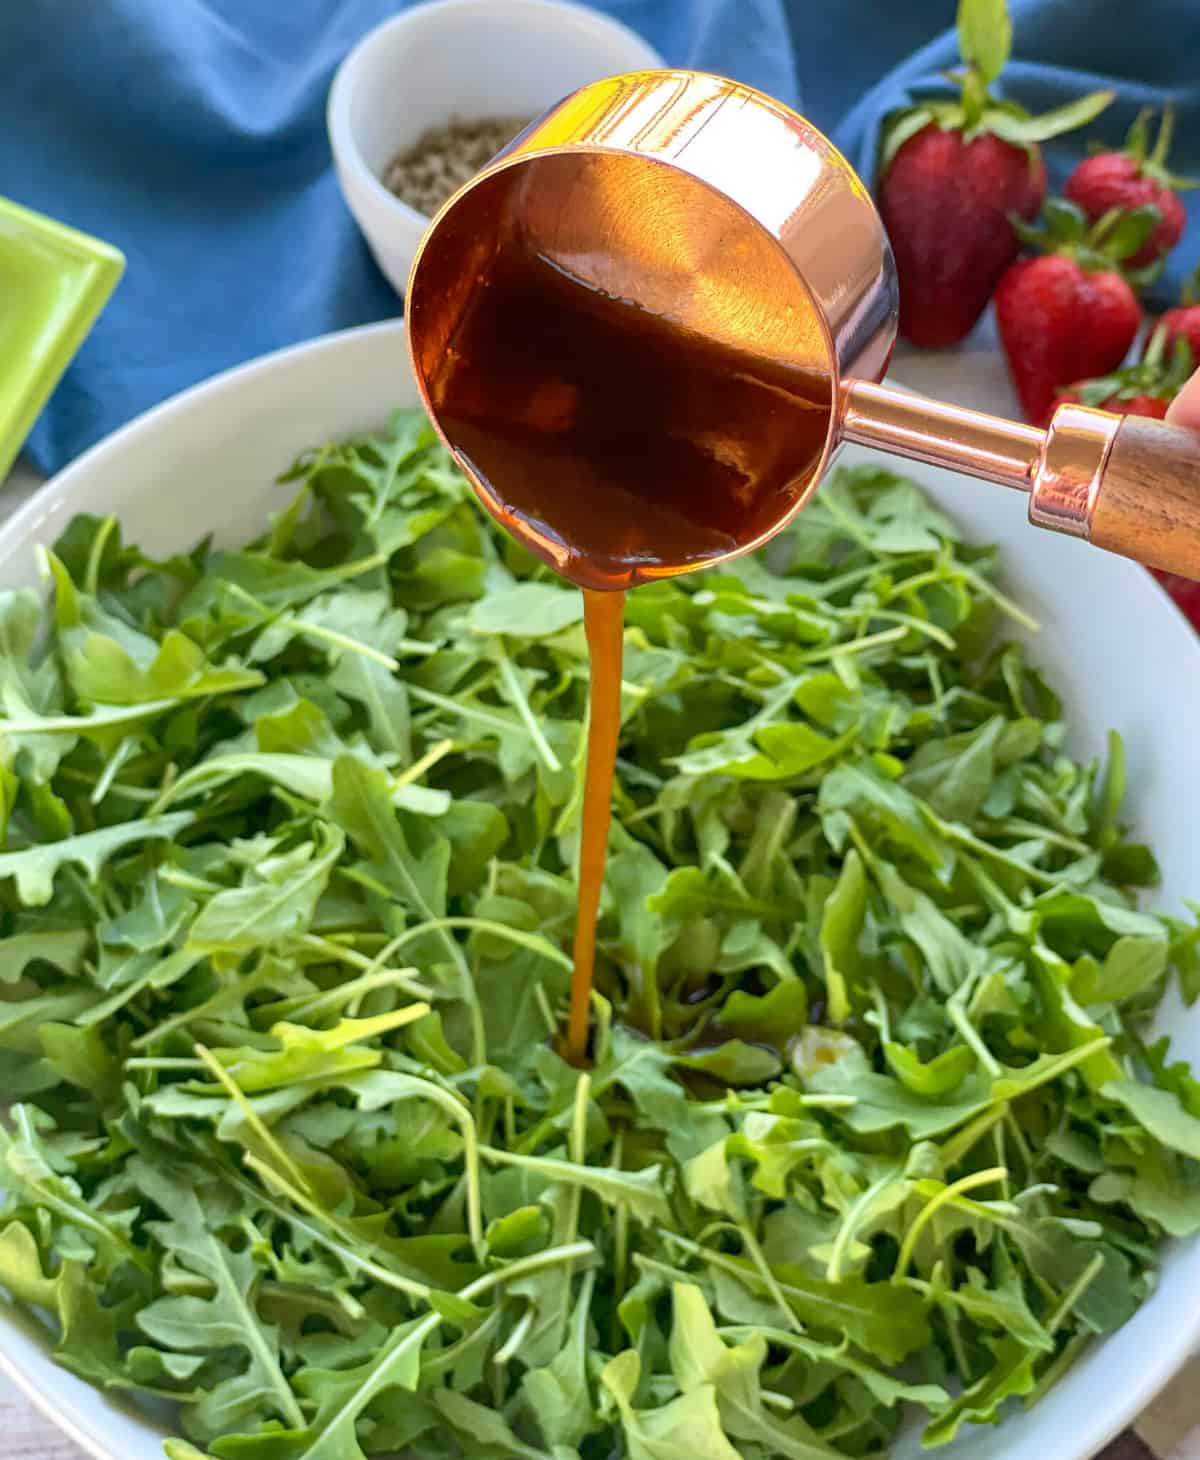 Pouring Balsamic Dressing on Rocket with Rose Gold Measuring Spoon 